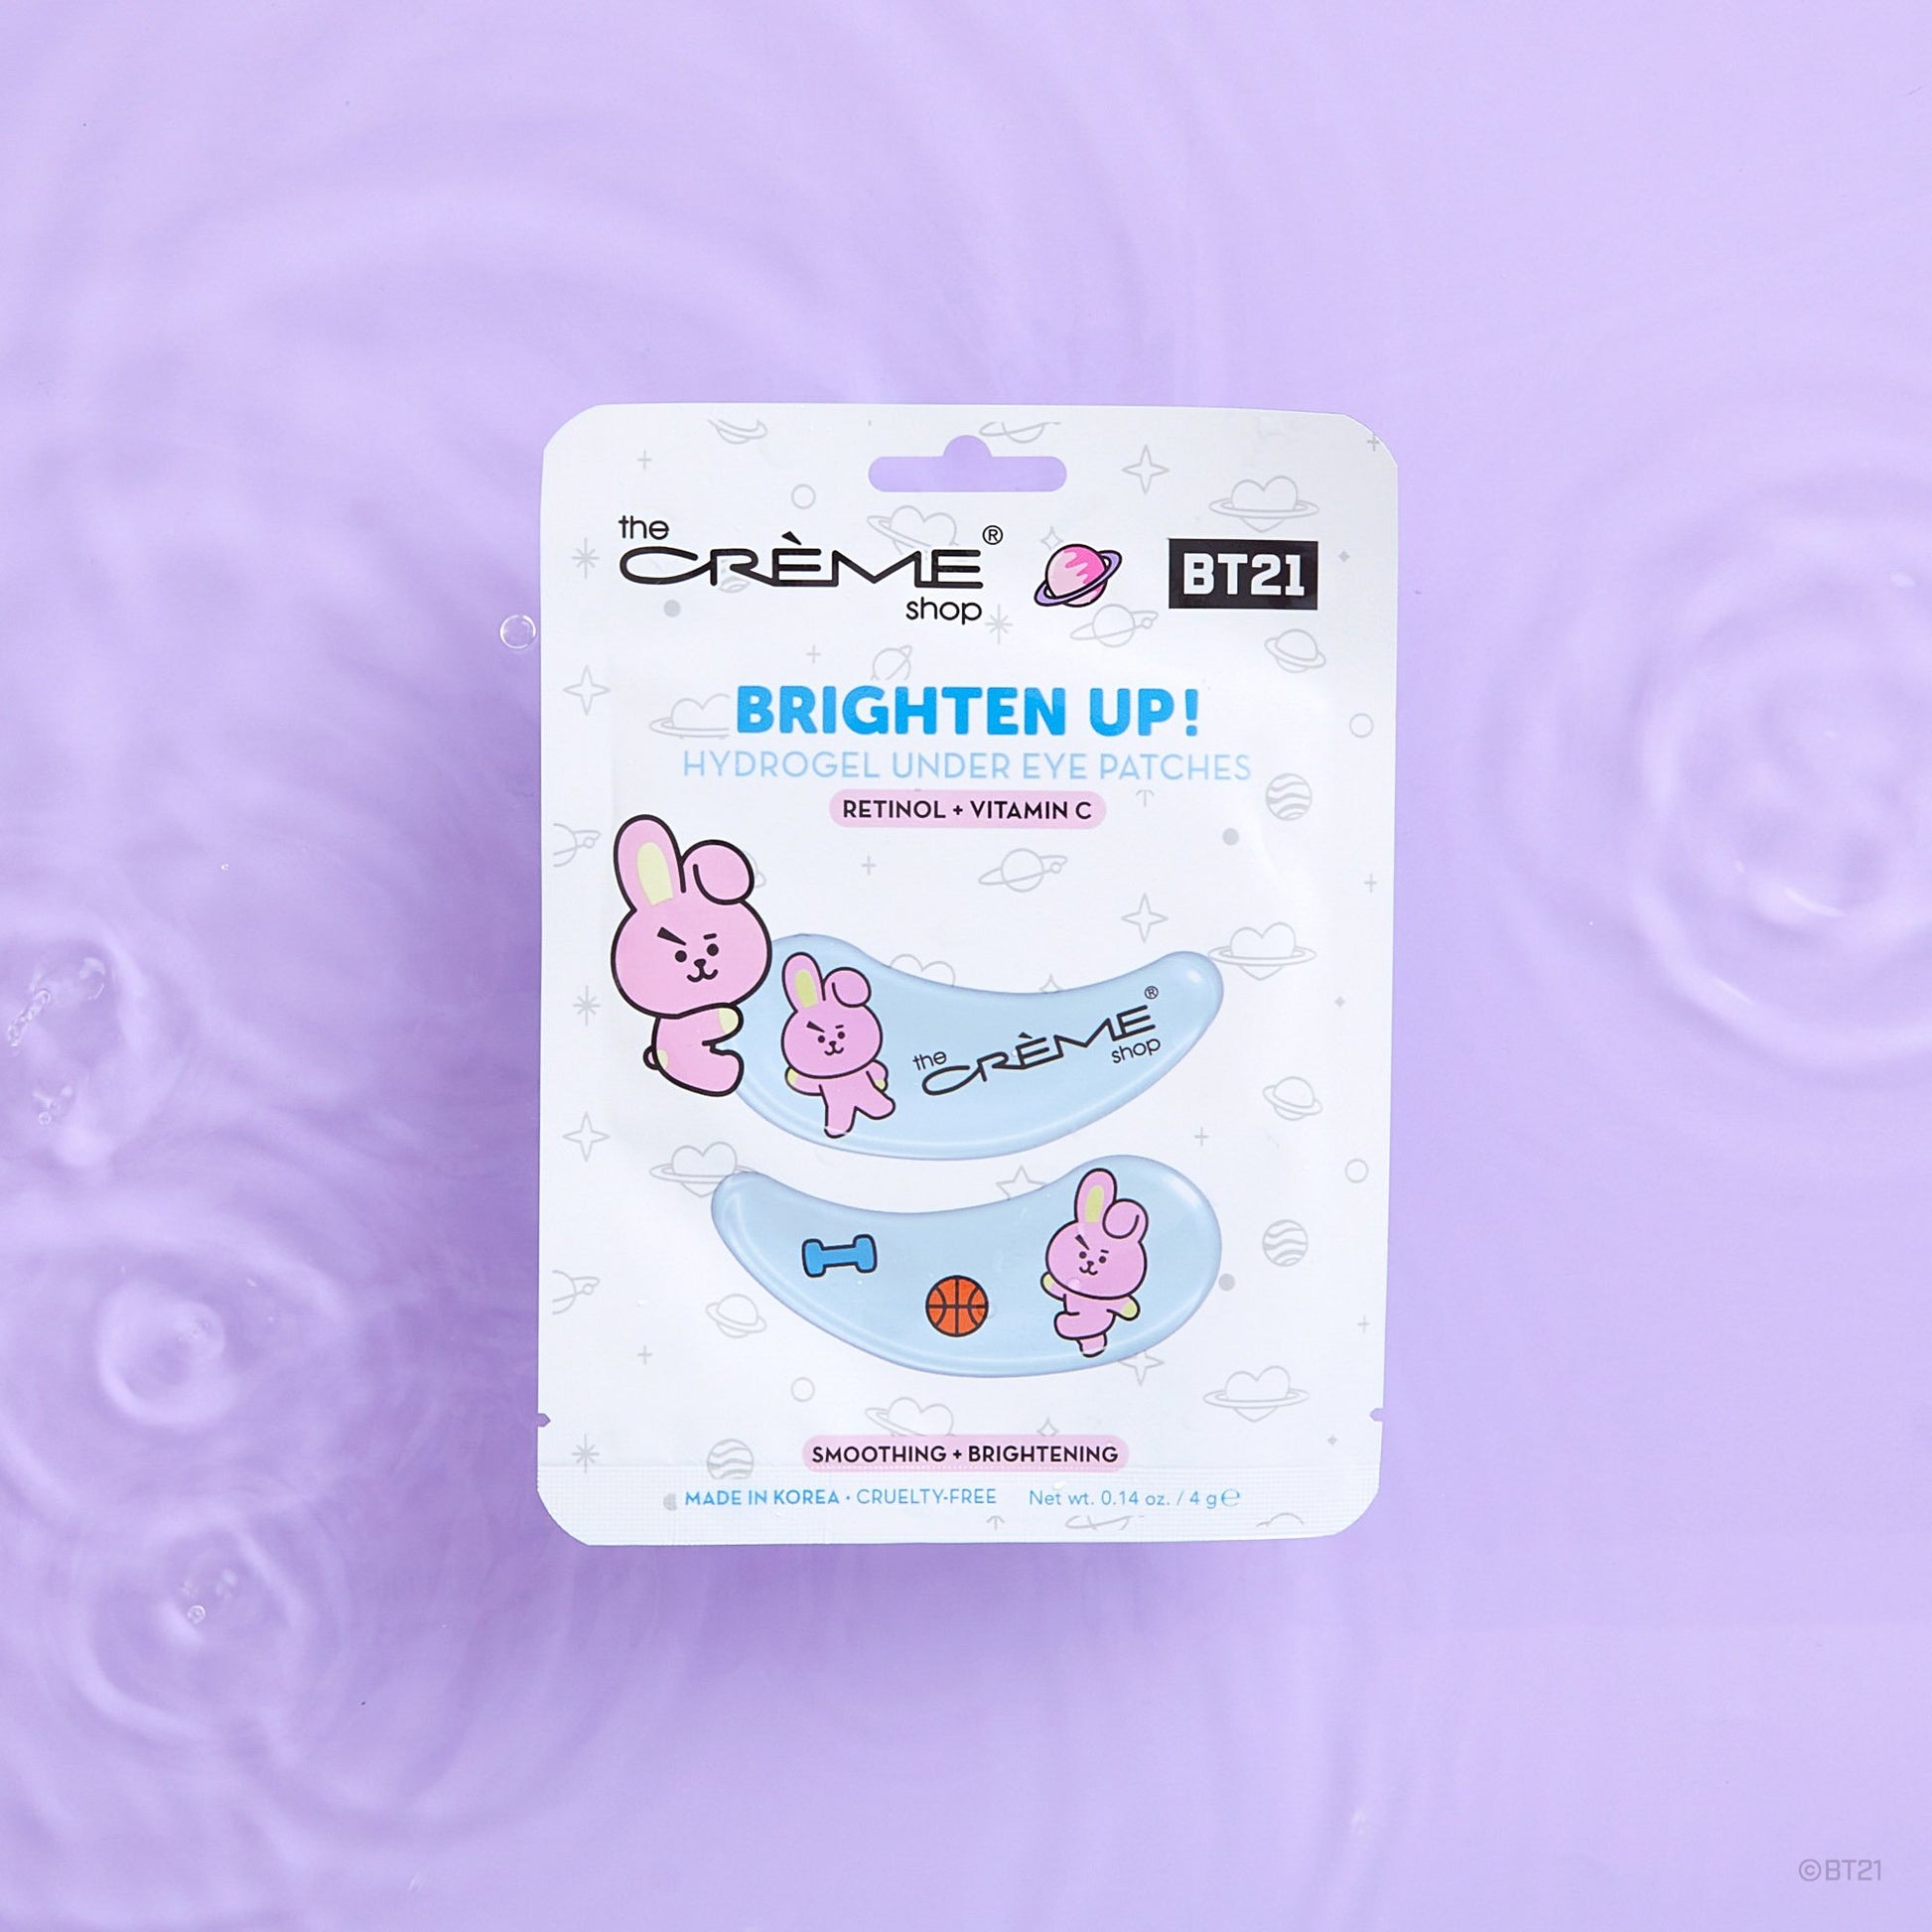 “Brighten Up” COOKY Hydrogel Under Eye Patches | Smoothing & Firming Under Eye Patches The Crème Shop x BT21 